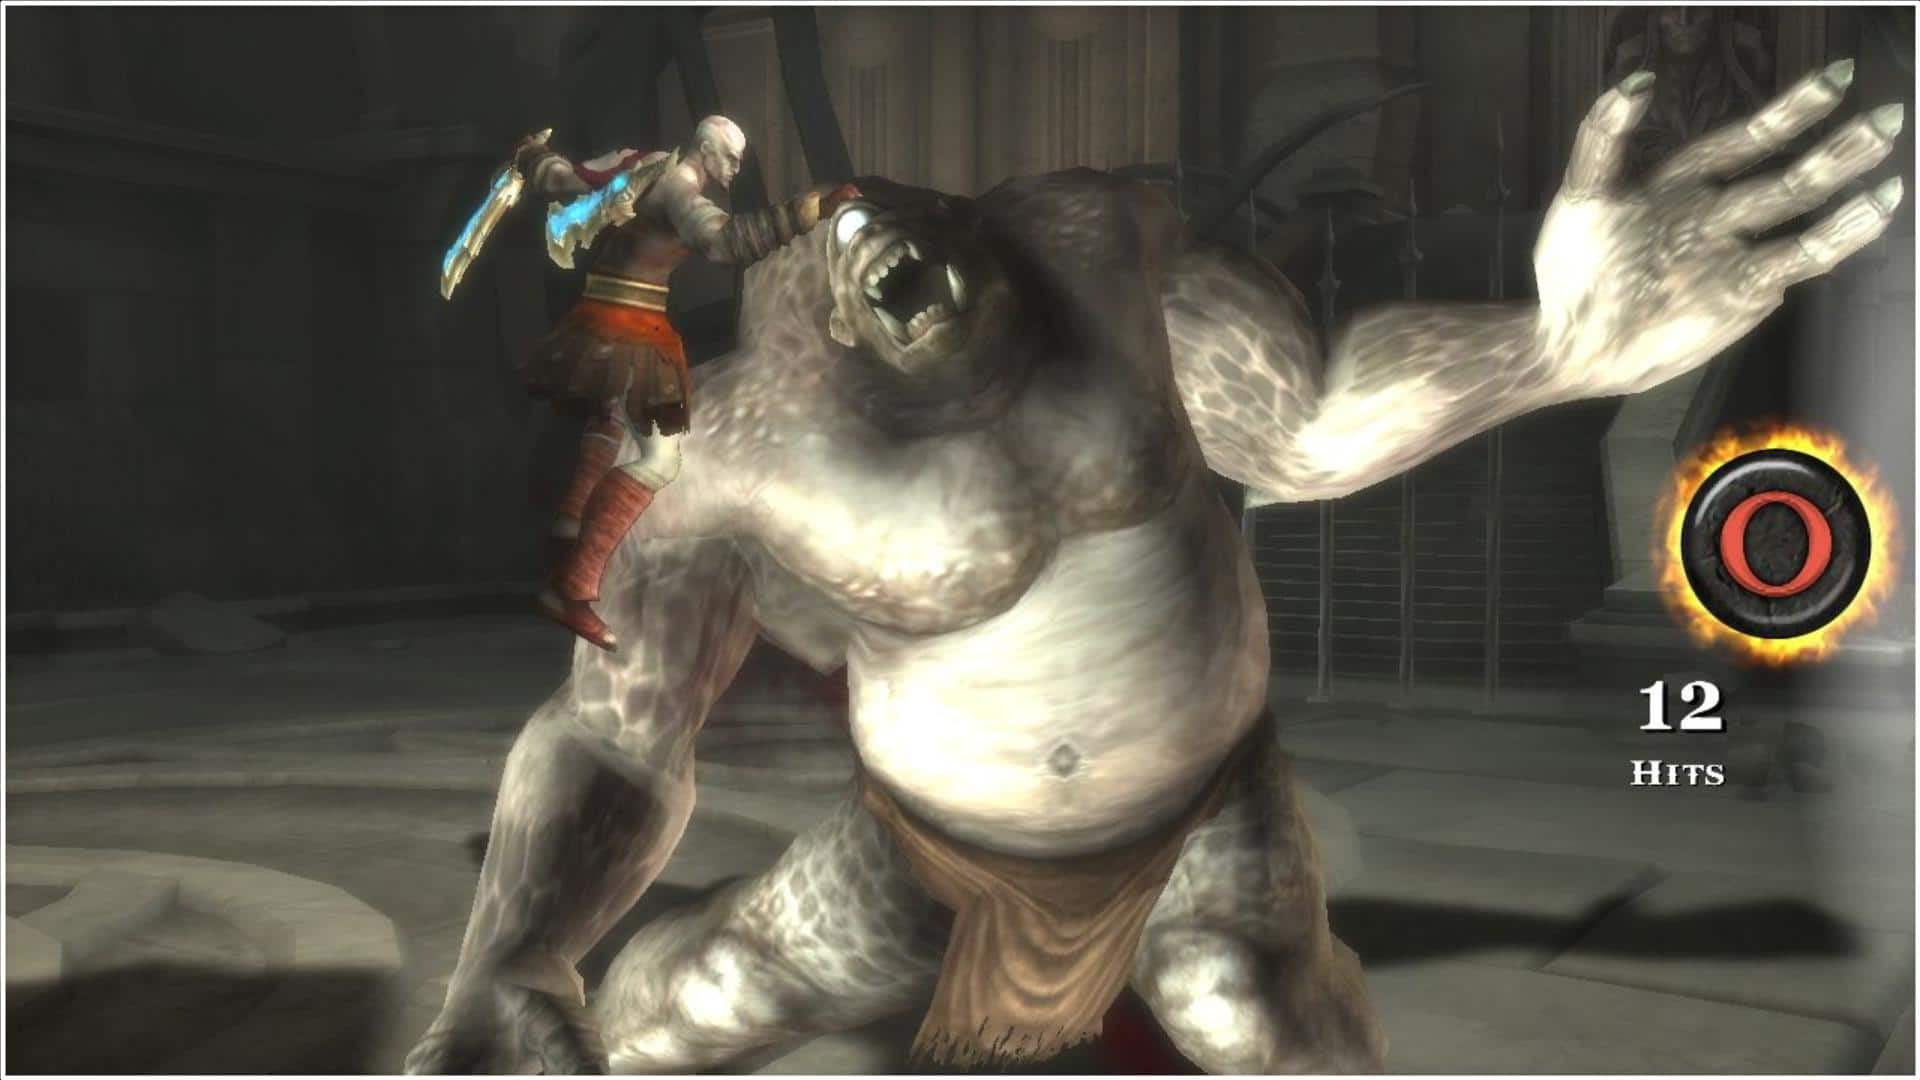 GamerStuffs on X: God of War – Ghost of Sparta (USA) PSP ISO Download FOR  android , windows And iphone    / X